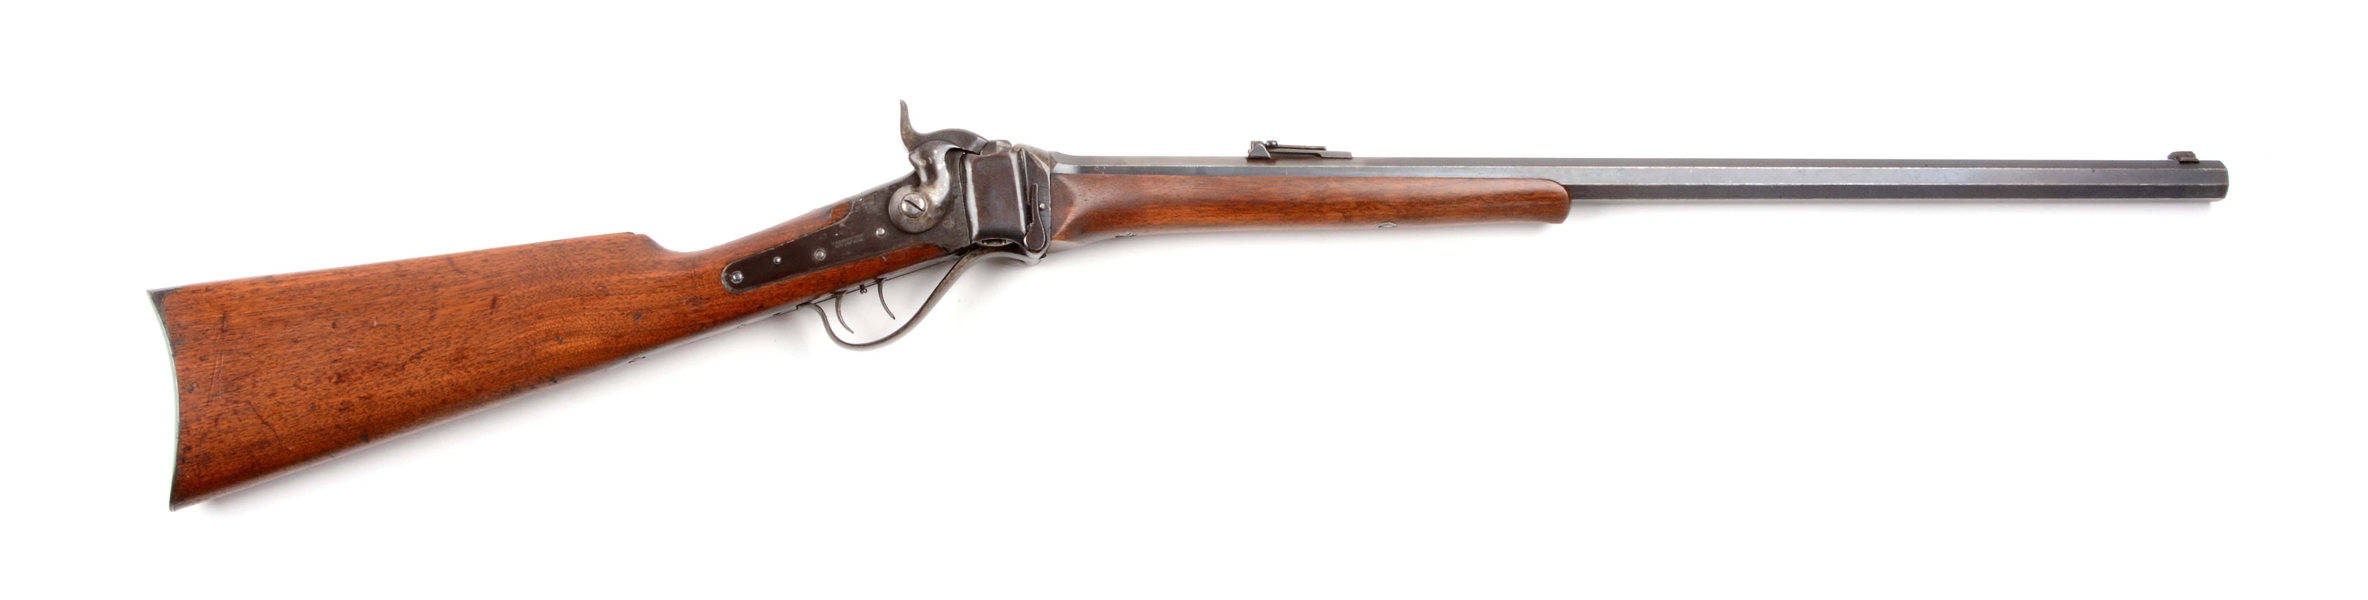 (A) 1874 STYLE SHARPS CONVERSION SPORTING RIFLE.